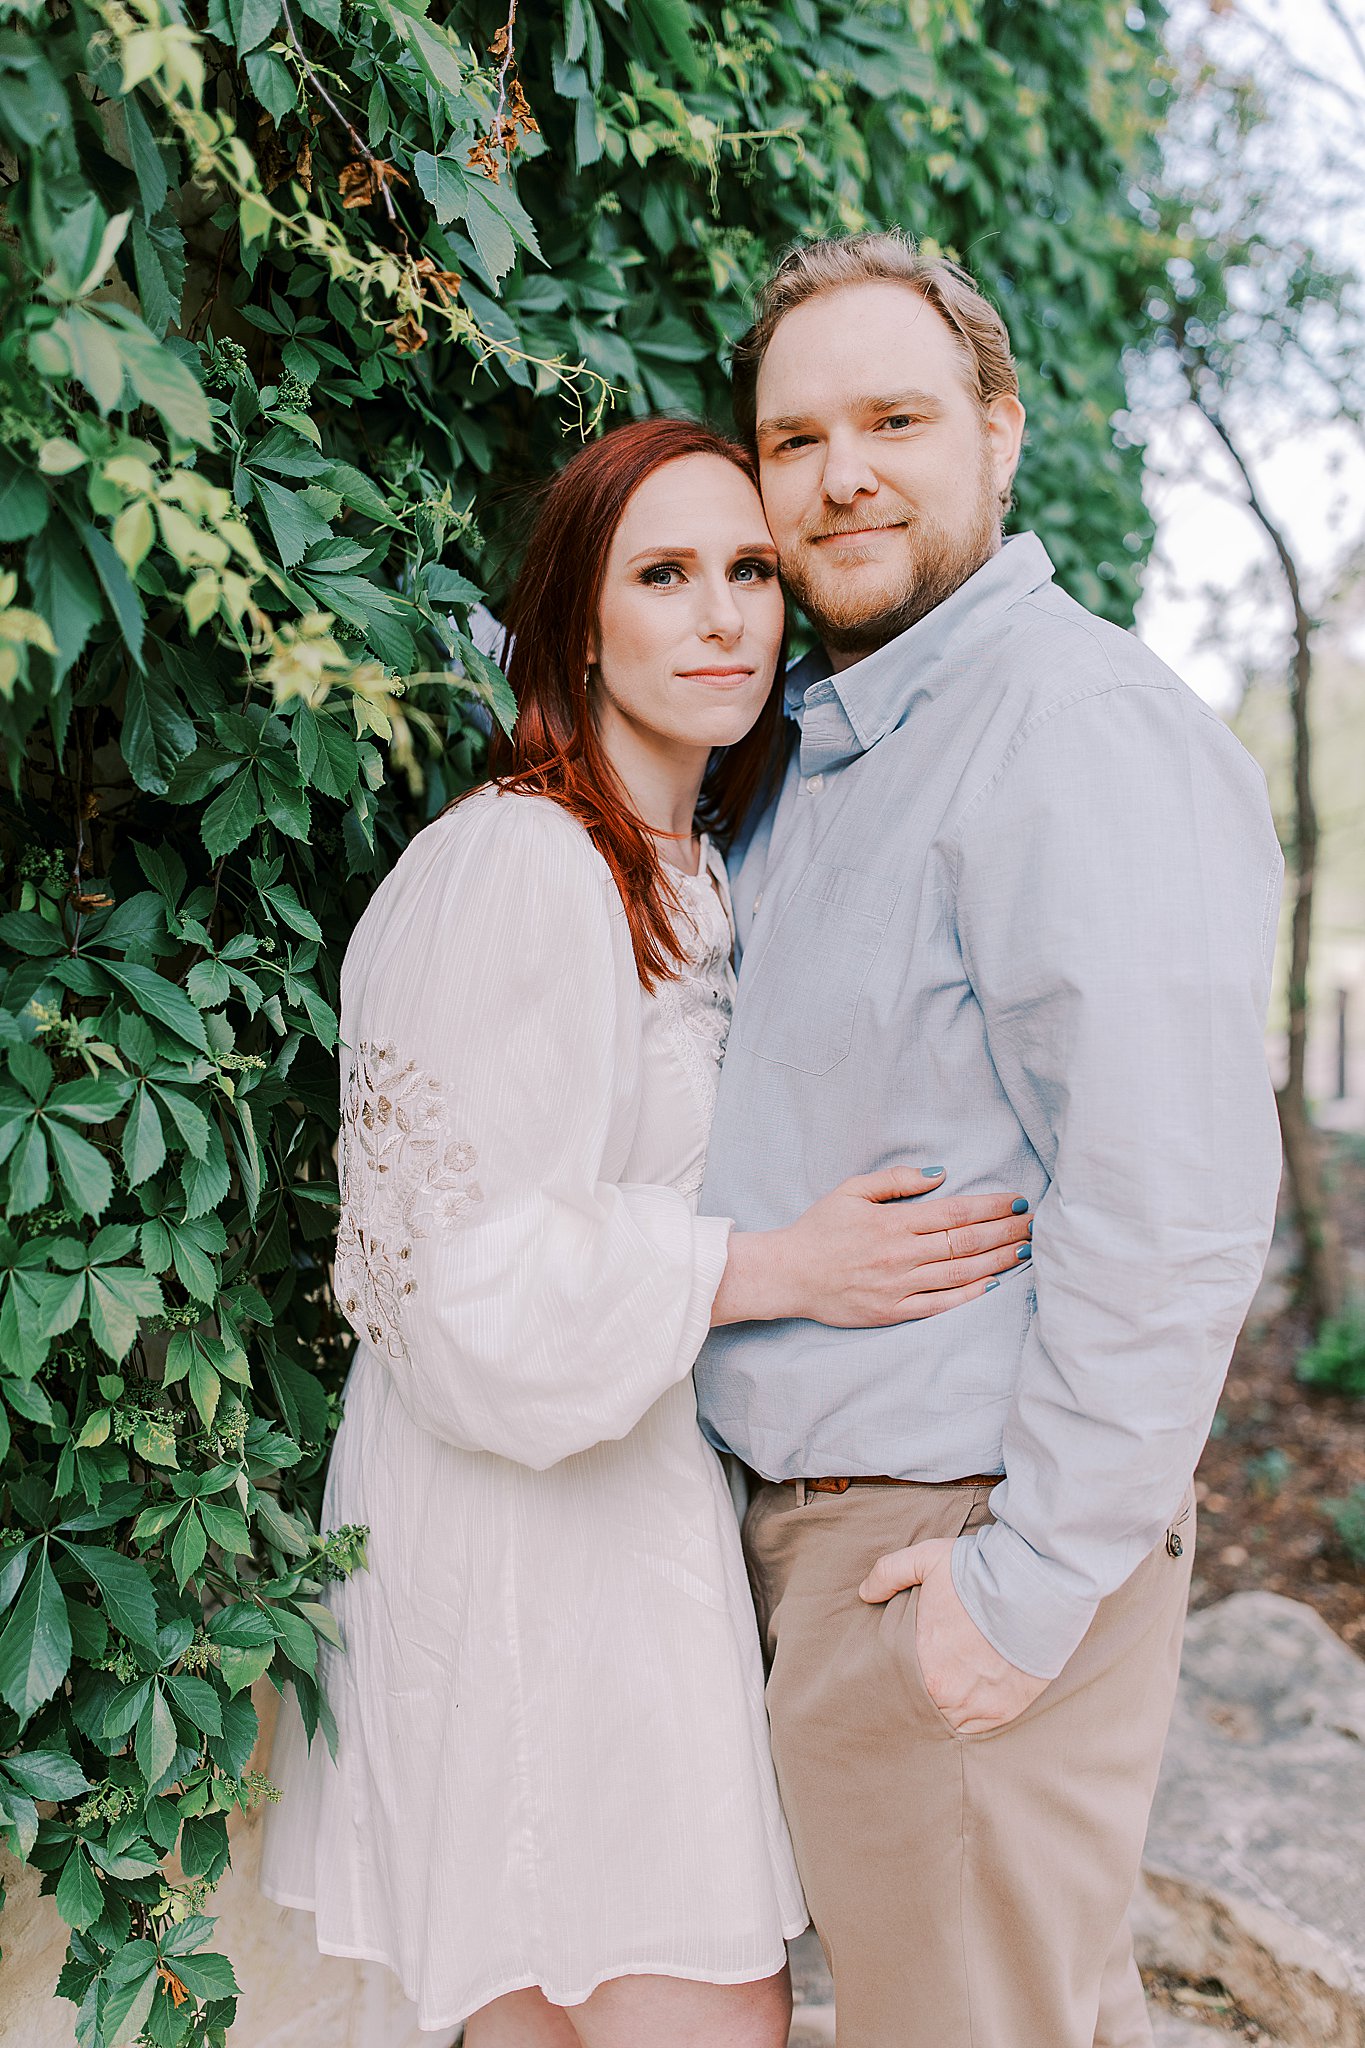 Engagement Session Dress Ideas from Anthropologie